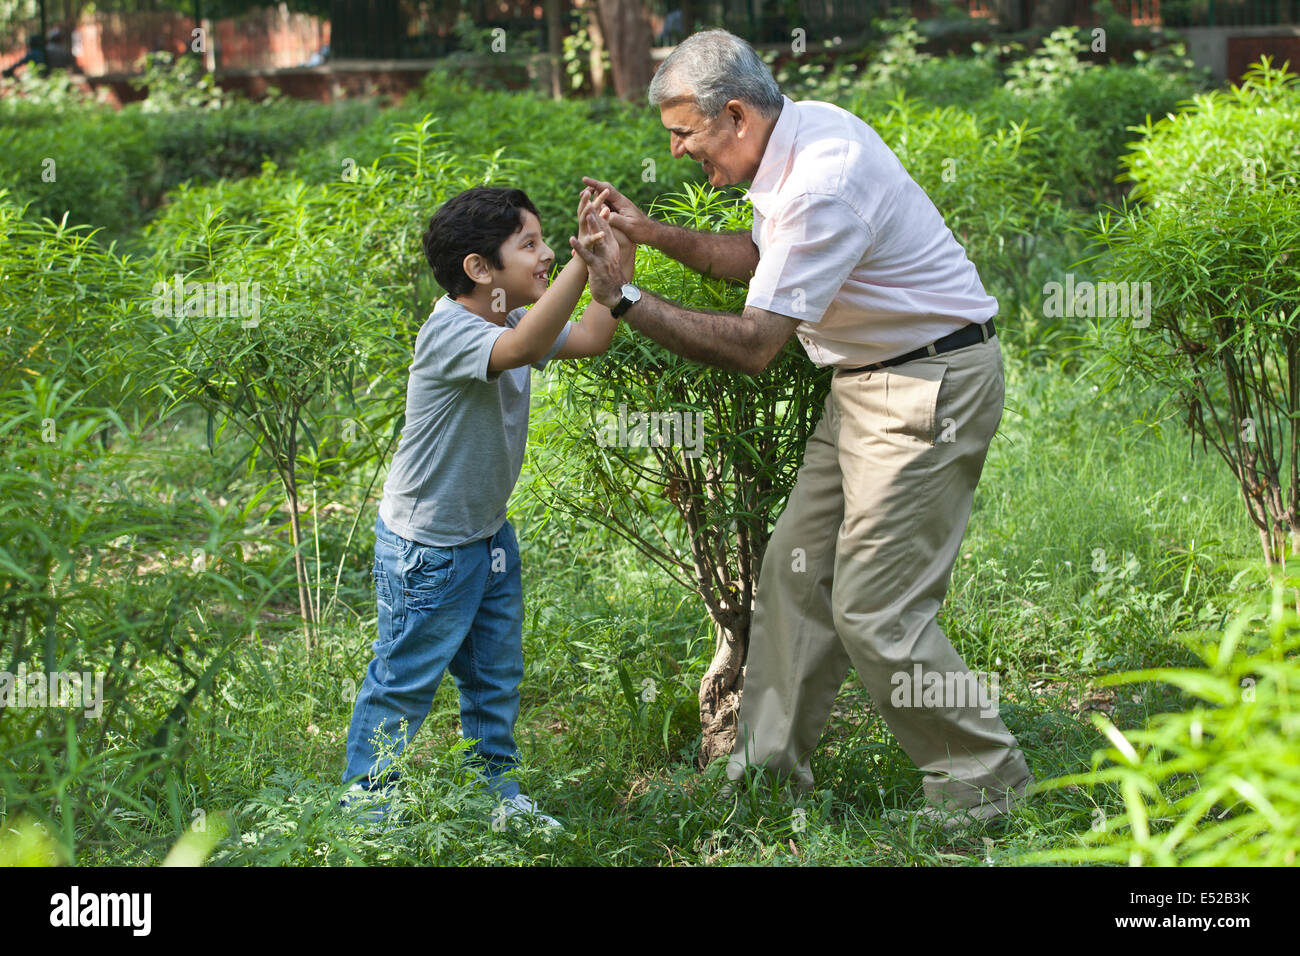 Grandfather and grandson playing in a park Stock Photo